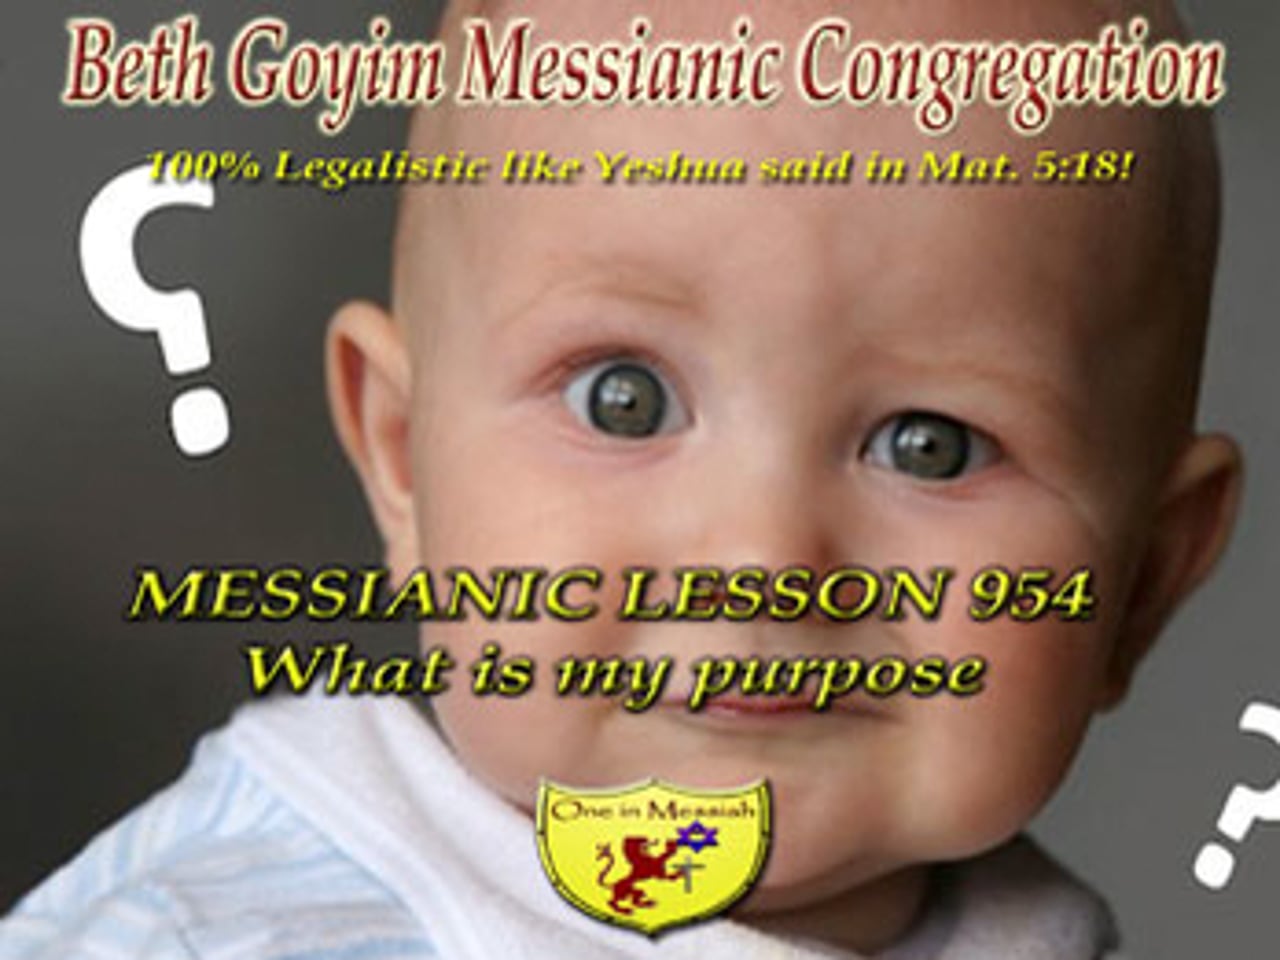 BGMCTV MESSIANIC LESSON 954 WHAT IS MY PURPOSE